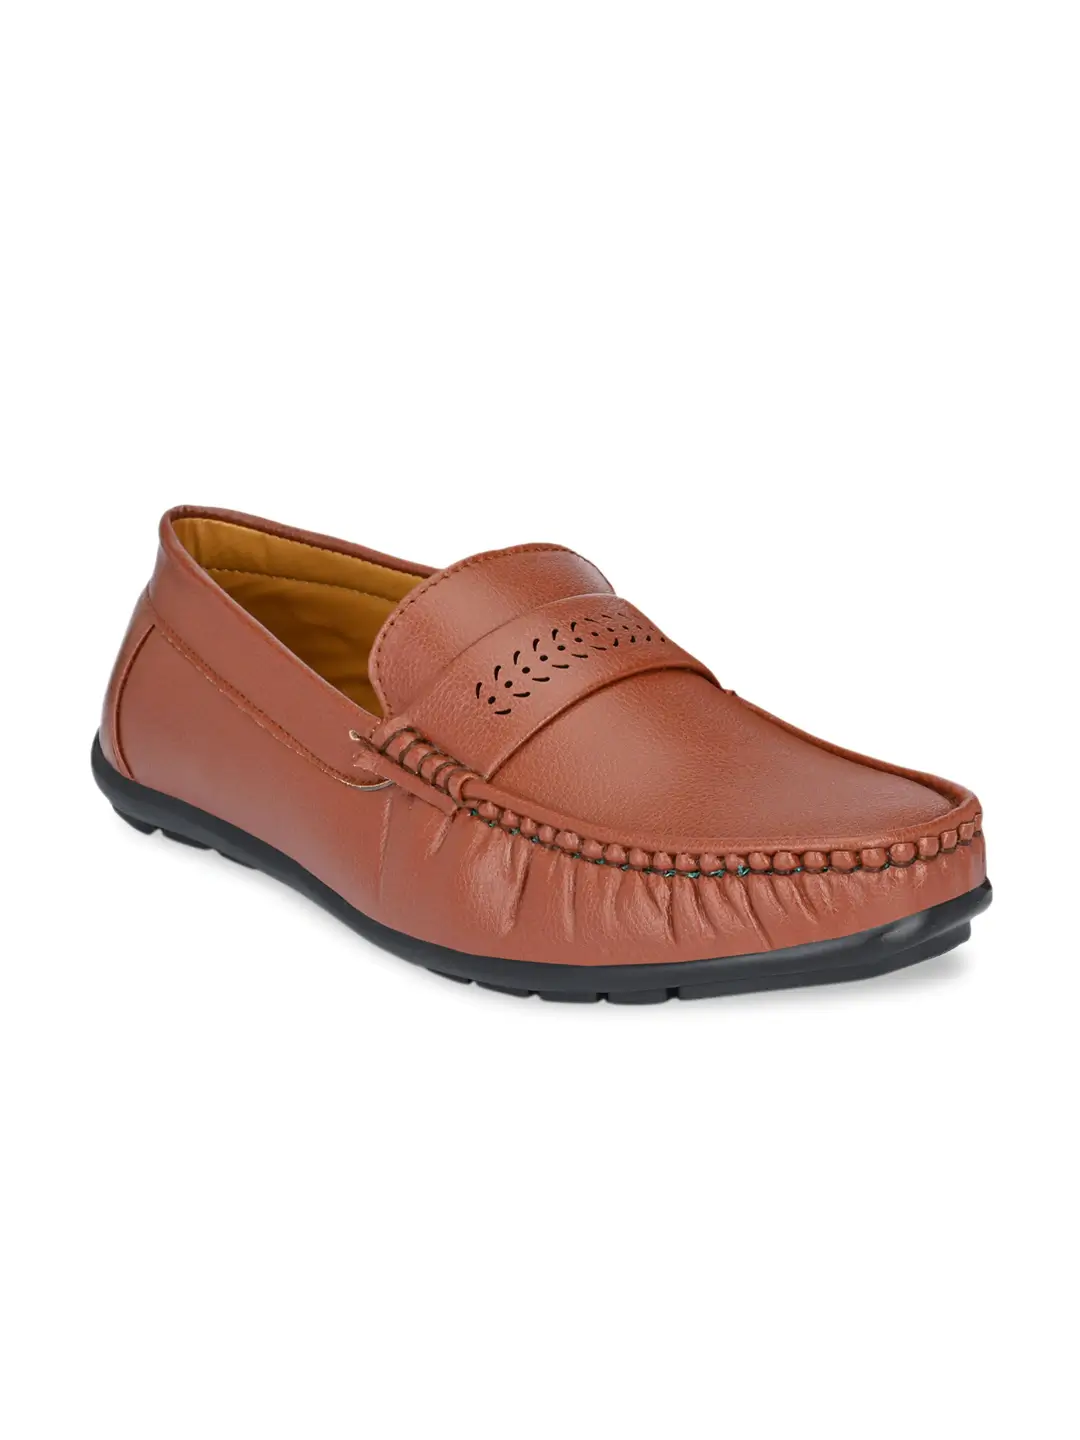 Men Tan Perforations Loafers